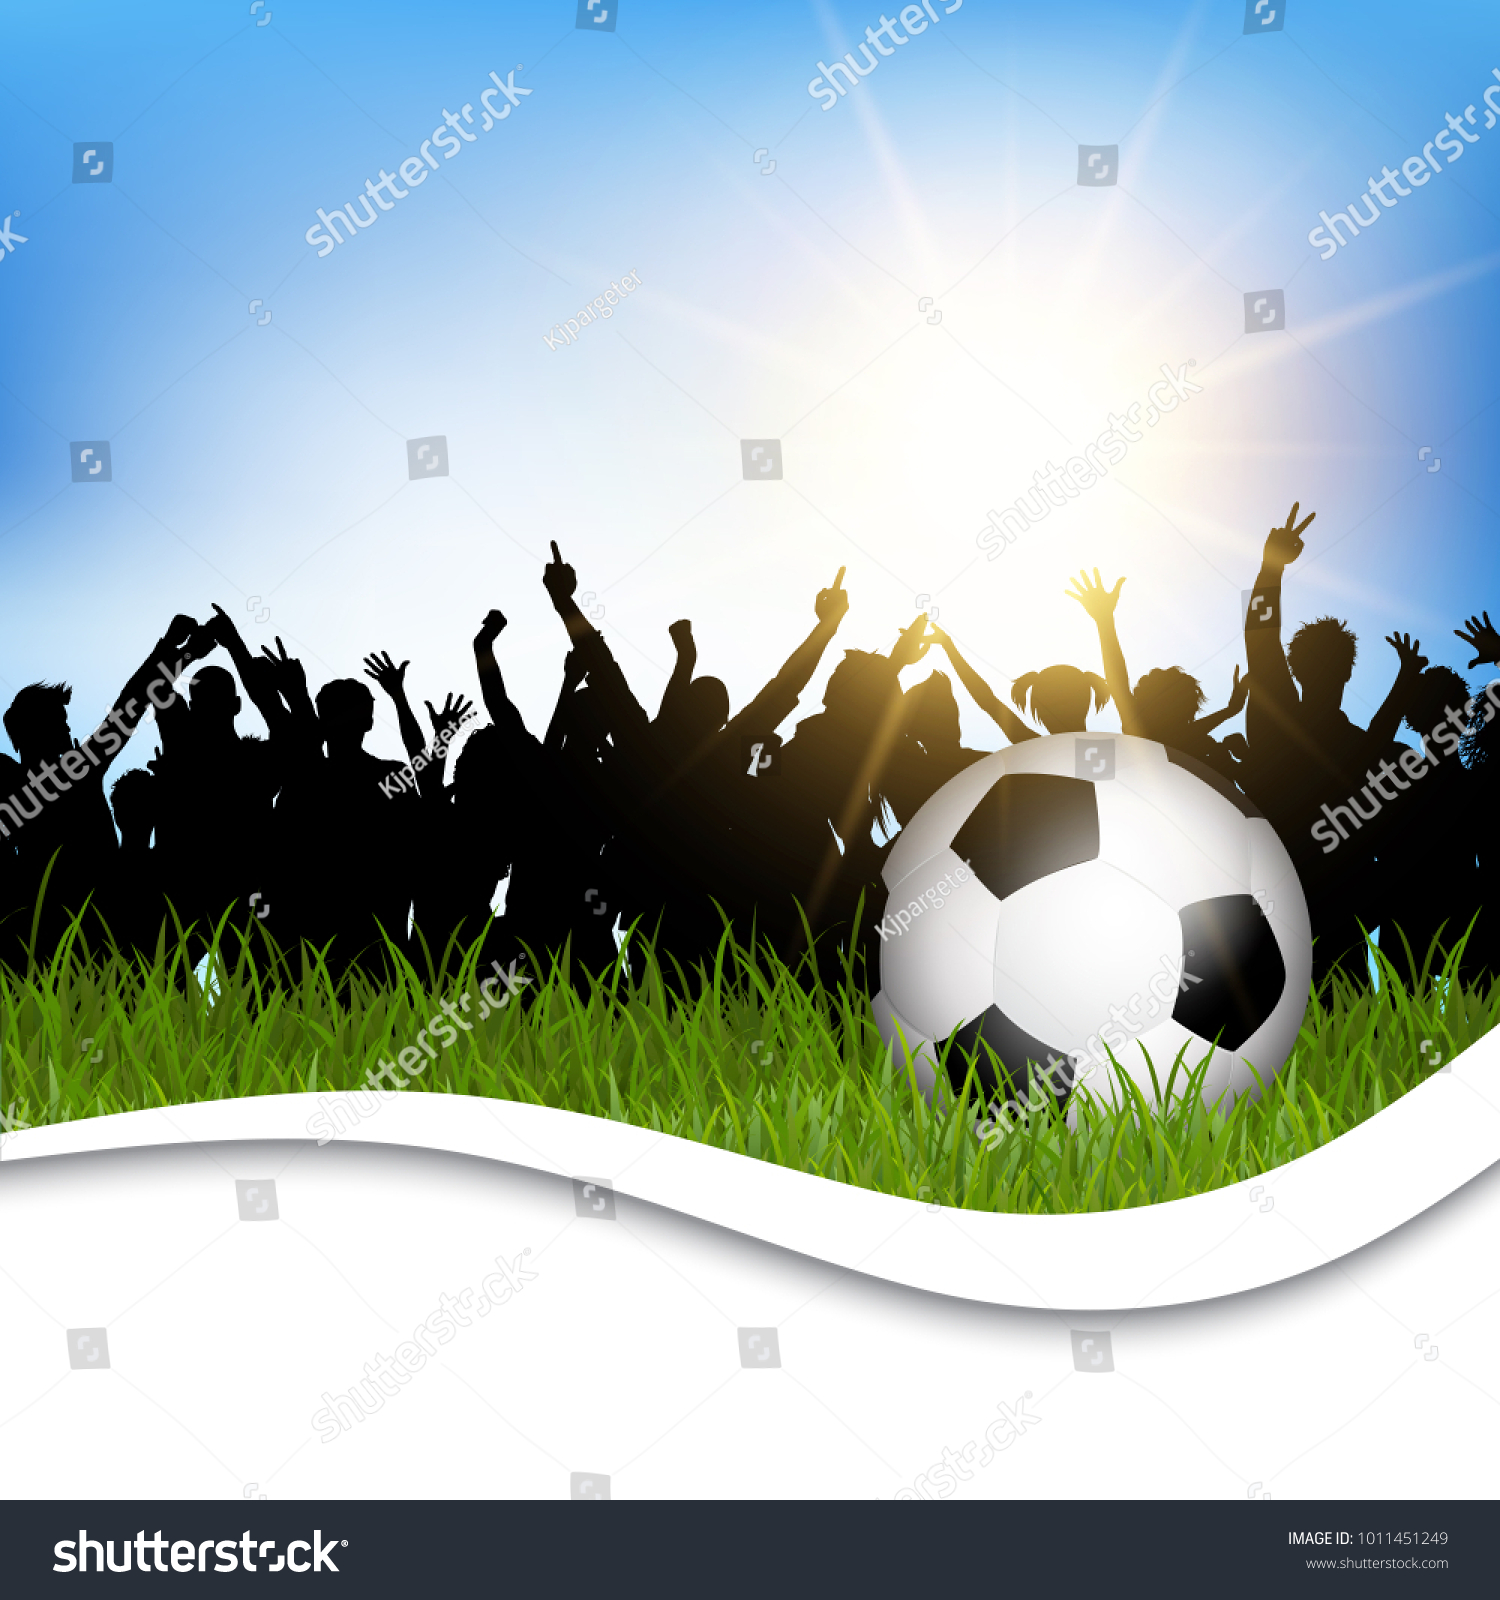 Football / soccer ball in grass with silhouette of cheering crowd #1011451249